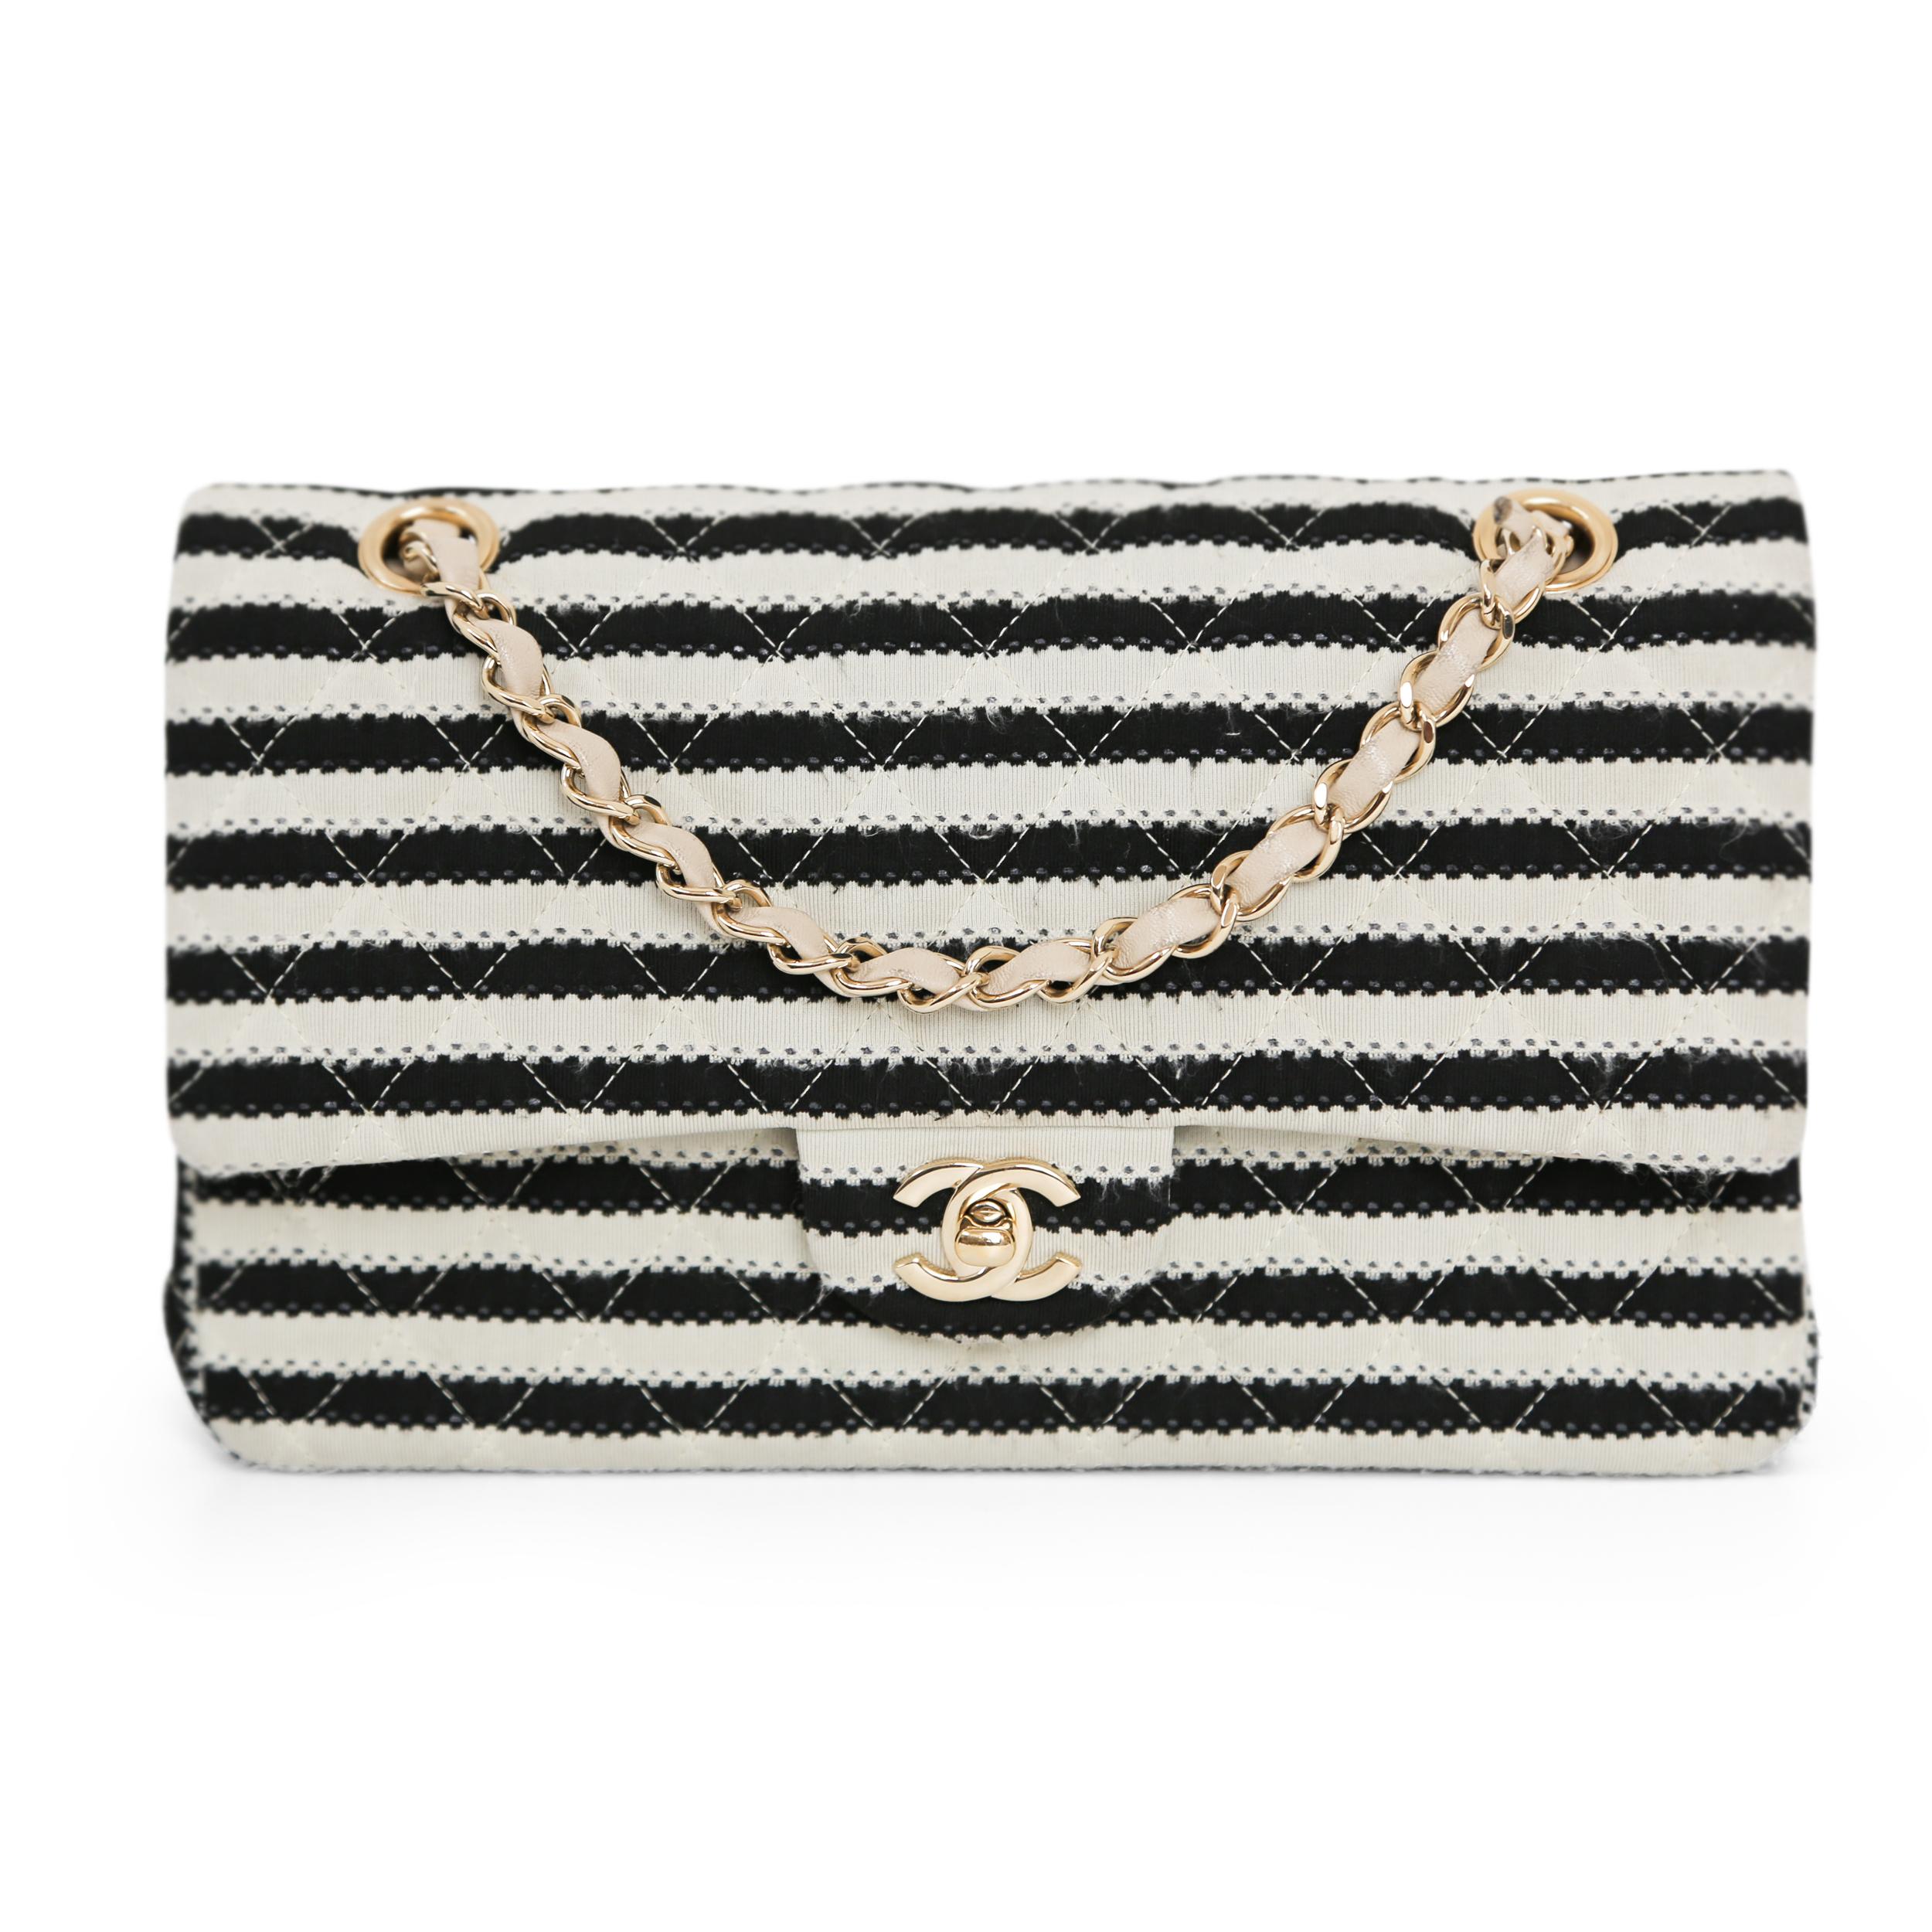 Chanel Coco Sailor Black and Cream Medium Double Flap Bag 2014 For Sale 3